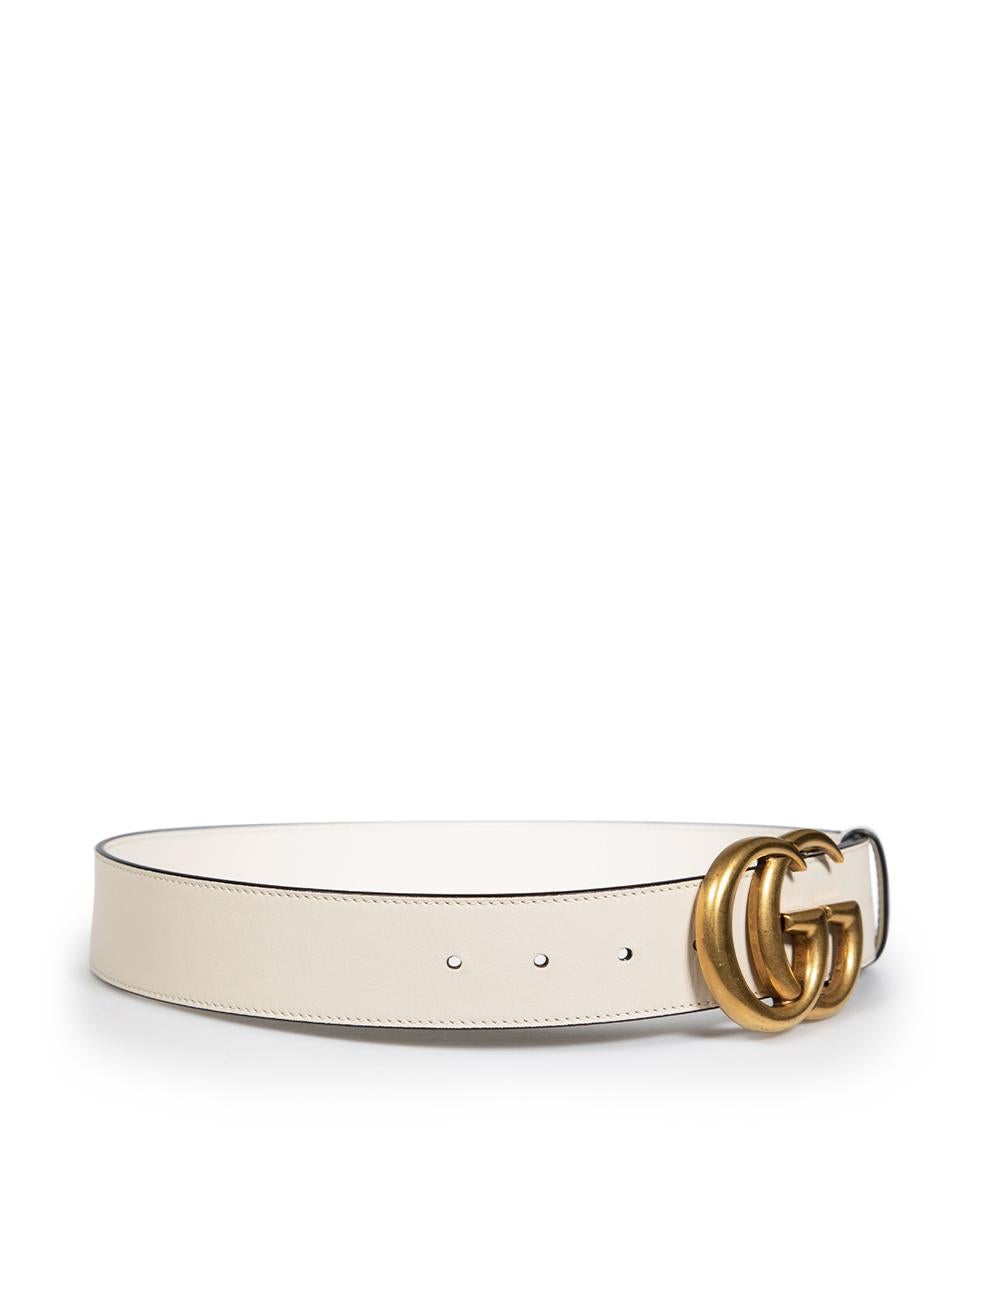 CONDITION is Very good. Minimal wear to belt is evident. Minimal wear to the front with small indents to the leather on this used Gucci designer resale item.
 
 
 
 Details
 
 
 Marmont model
 
 Cream
 
 Leather
 
 Belt
 
 GG logo buckle
 
 Gold